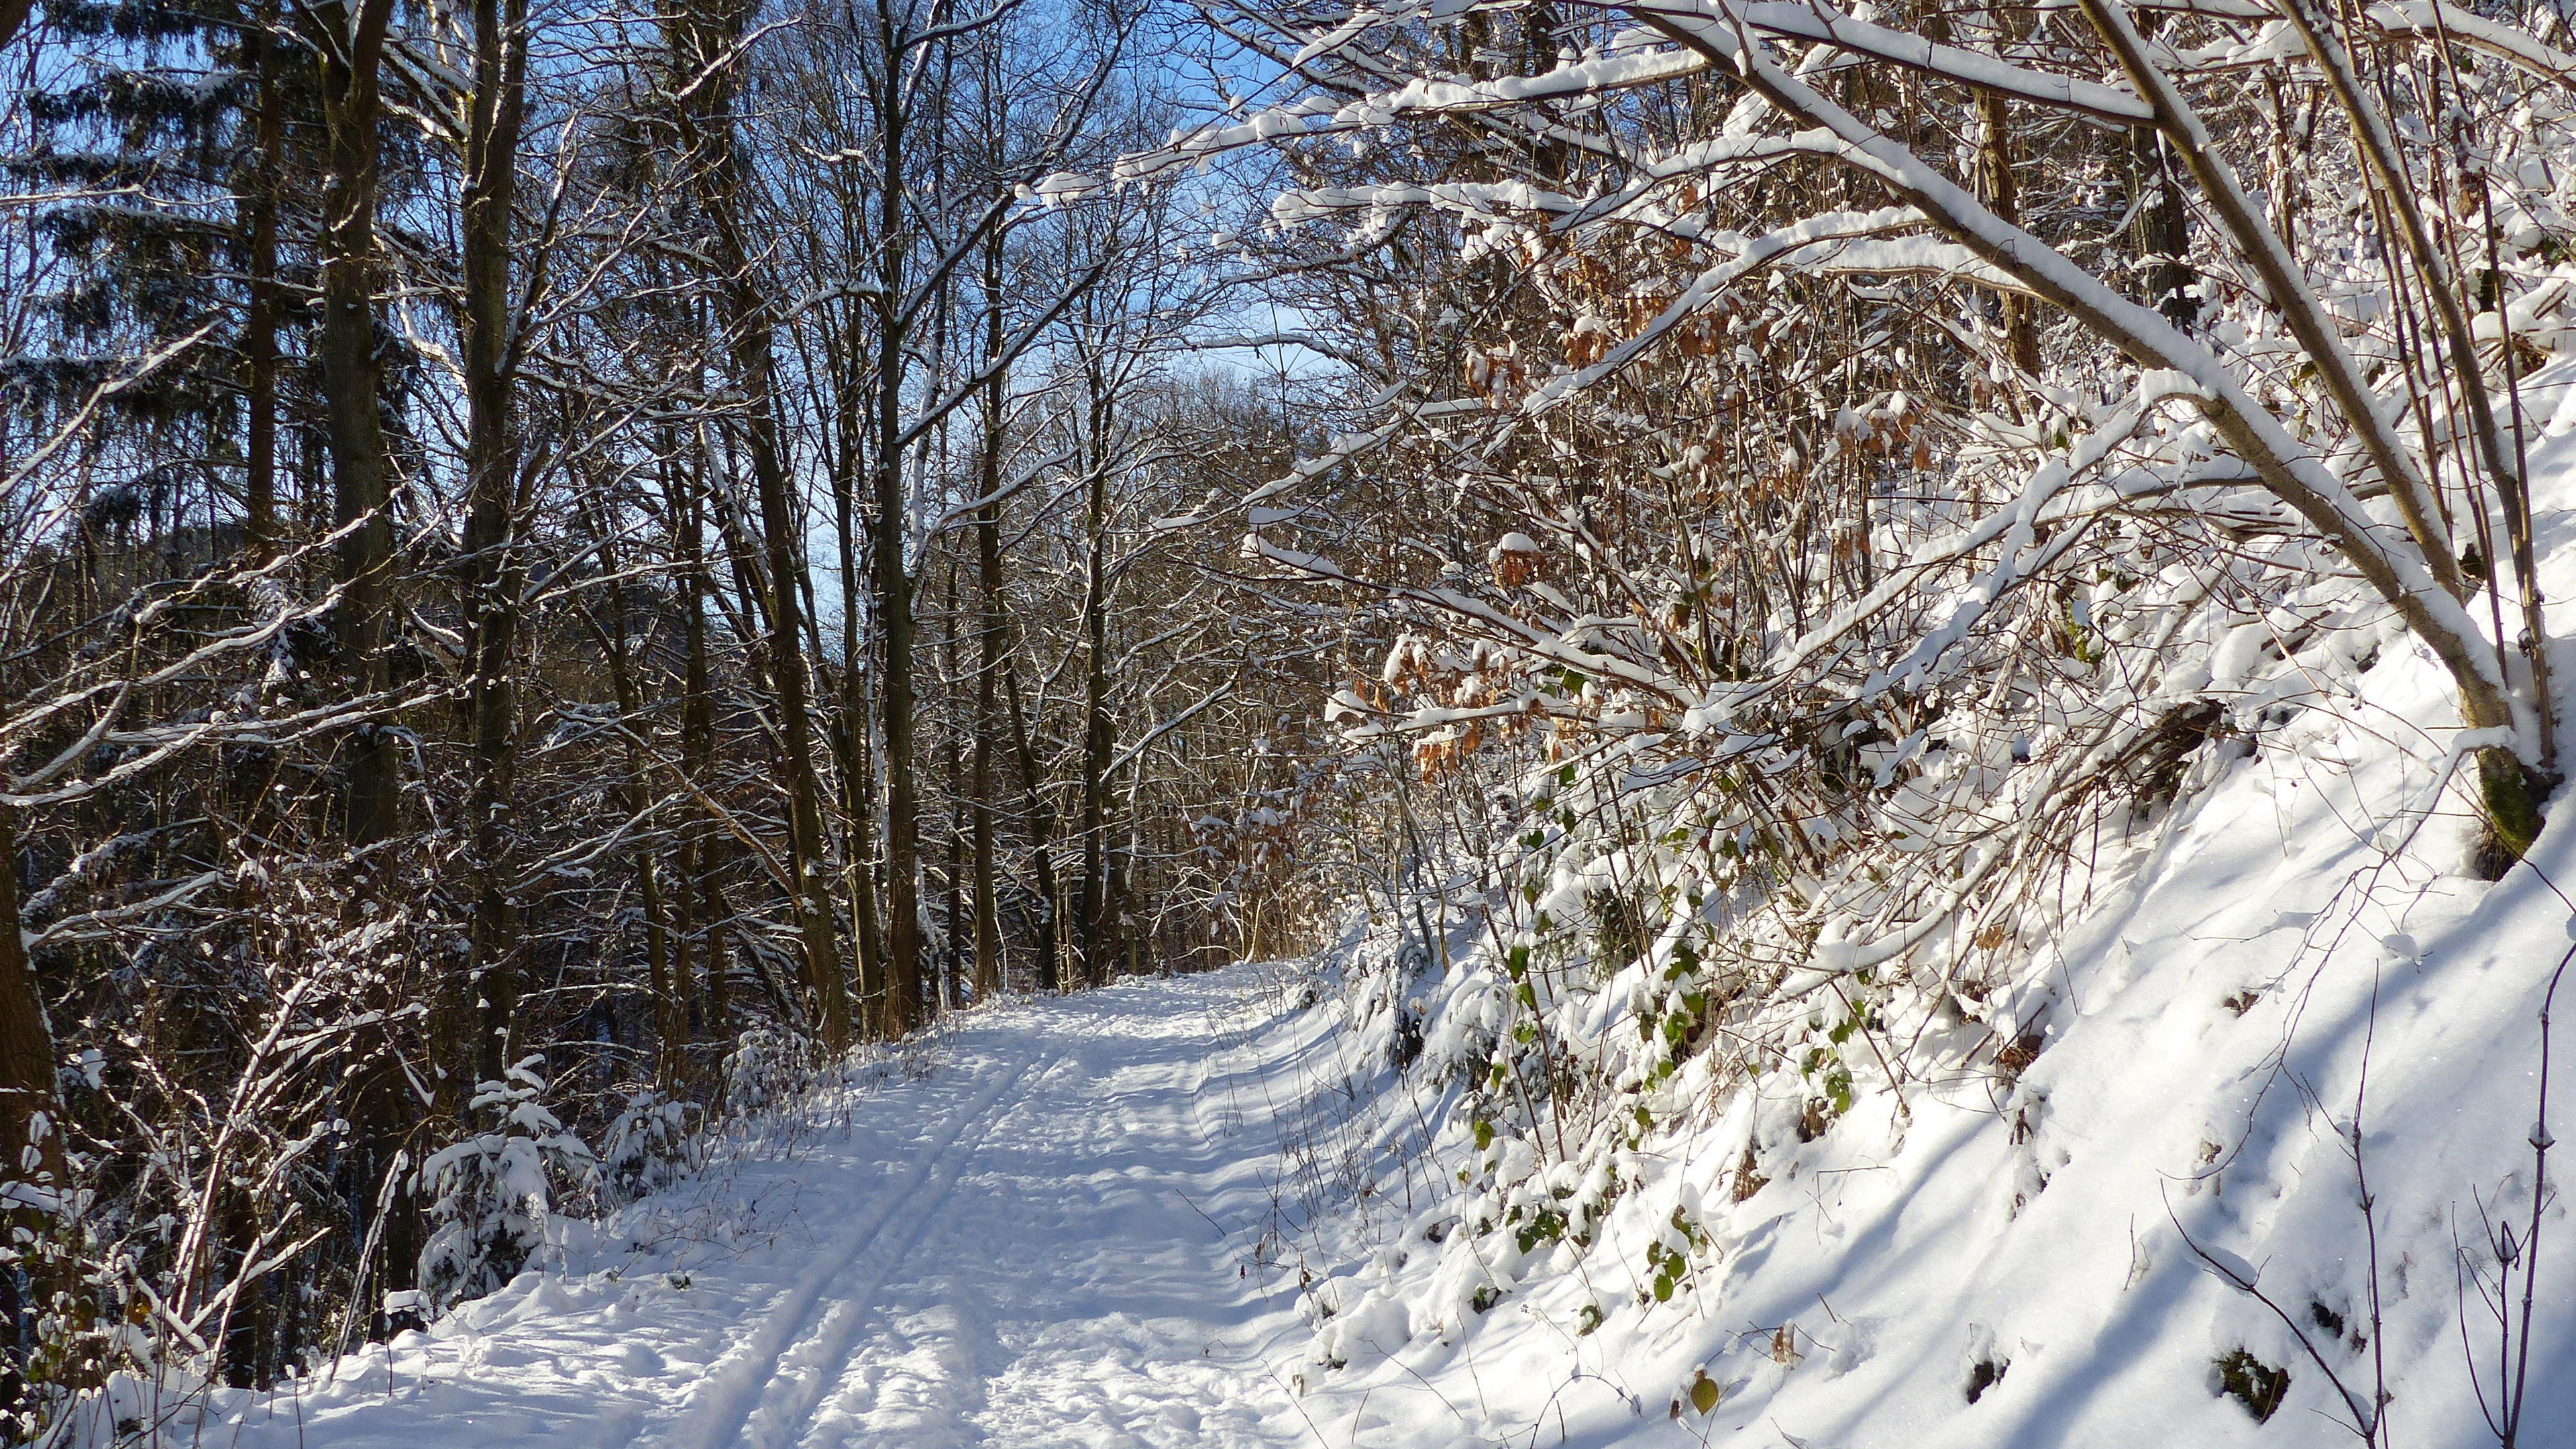 General 3840x2160 winter snow nature path trees